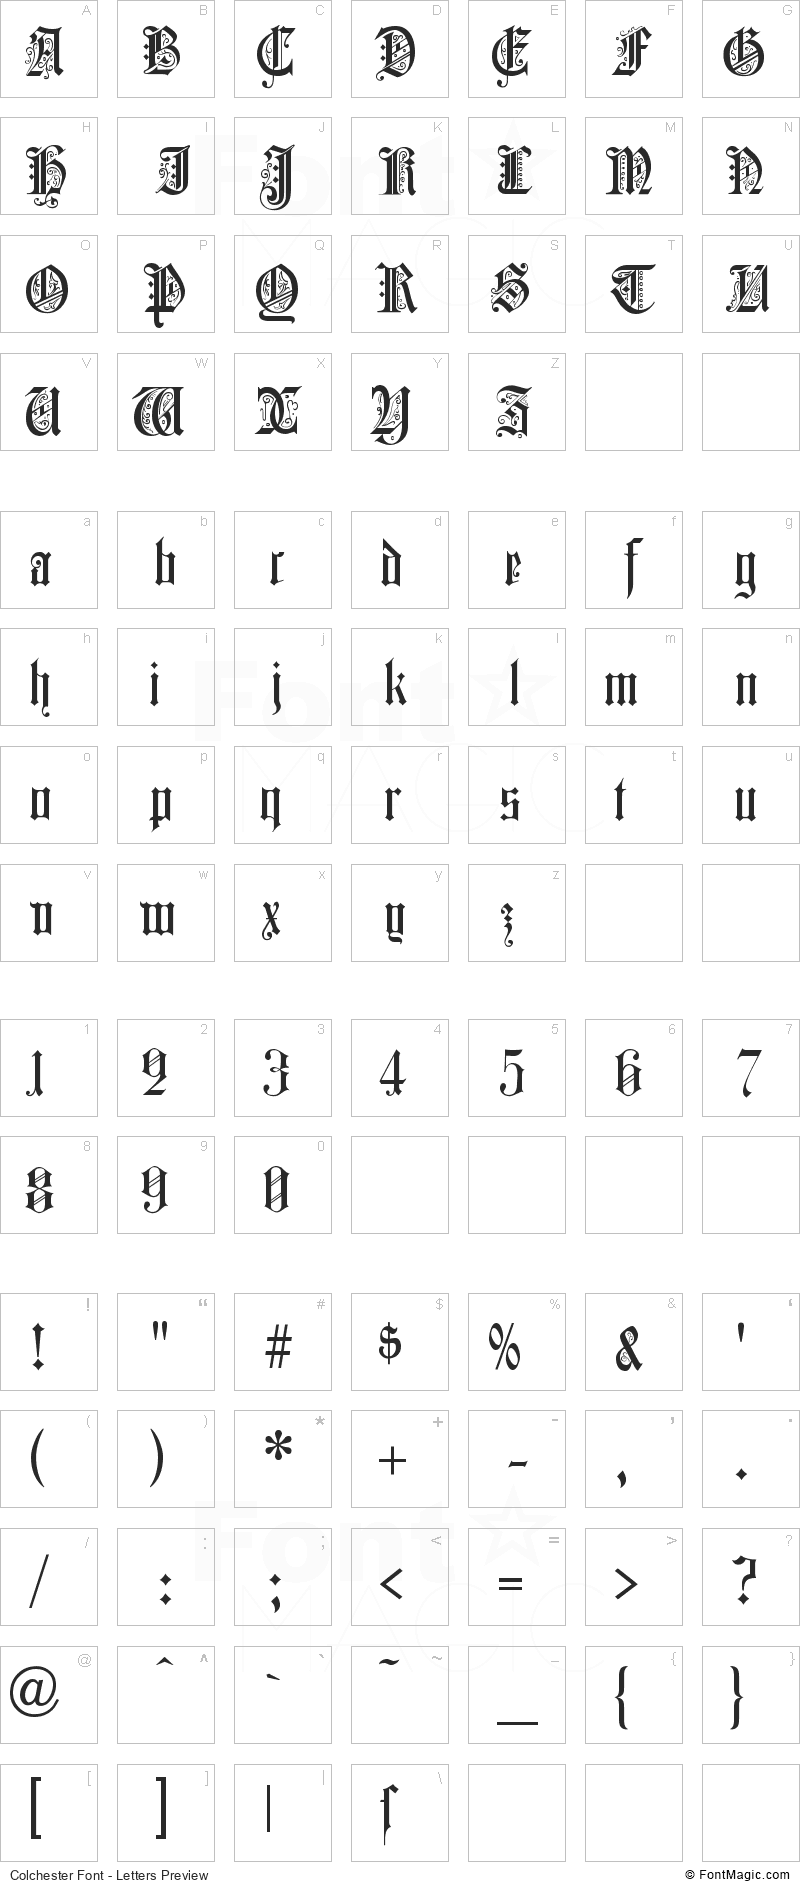 Colchester Font - All Latters Preview Chart